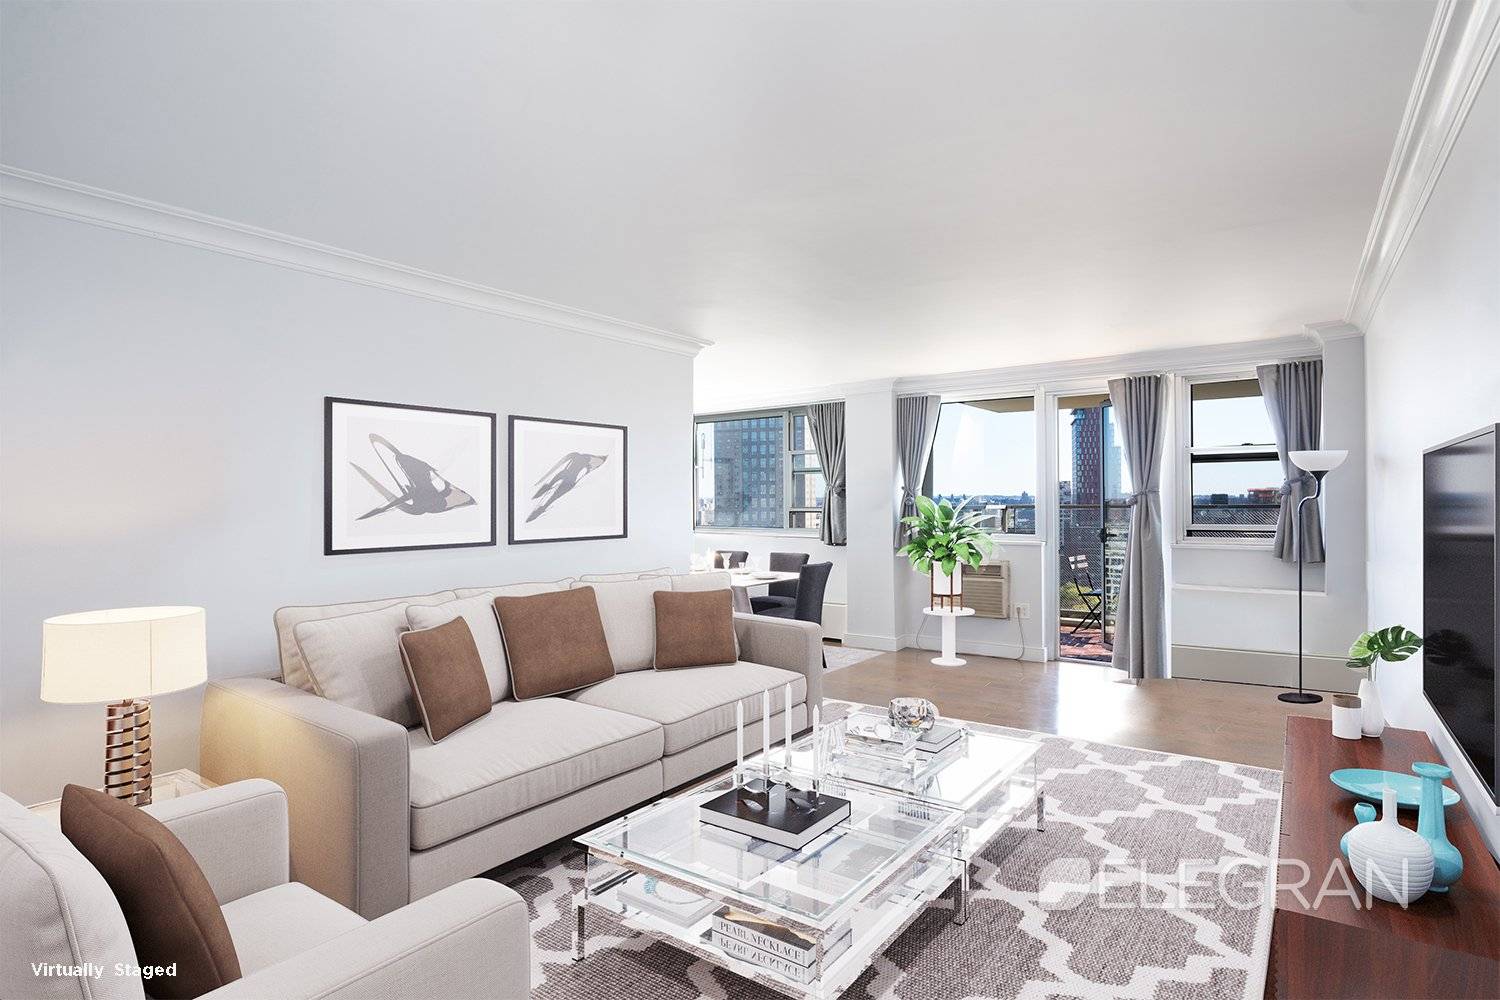 A beautifully renovated space with inviting views of the the Manhattan skyline, Brooklyn Bridge, East River, Cadman Plaza Park and the Brooklyn Skyline, 19E is a move in ready dream.